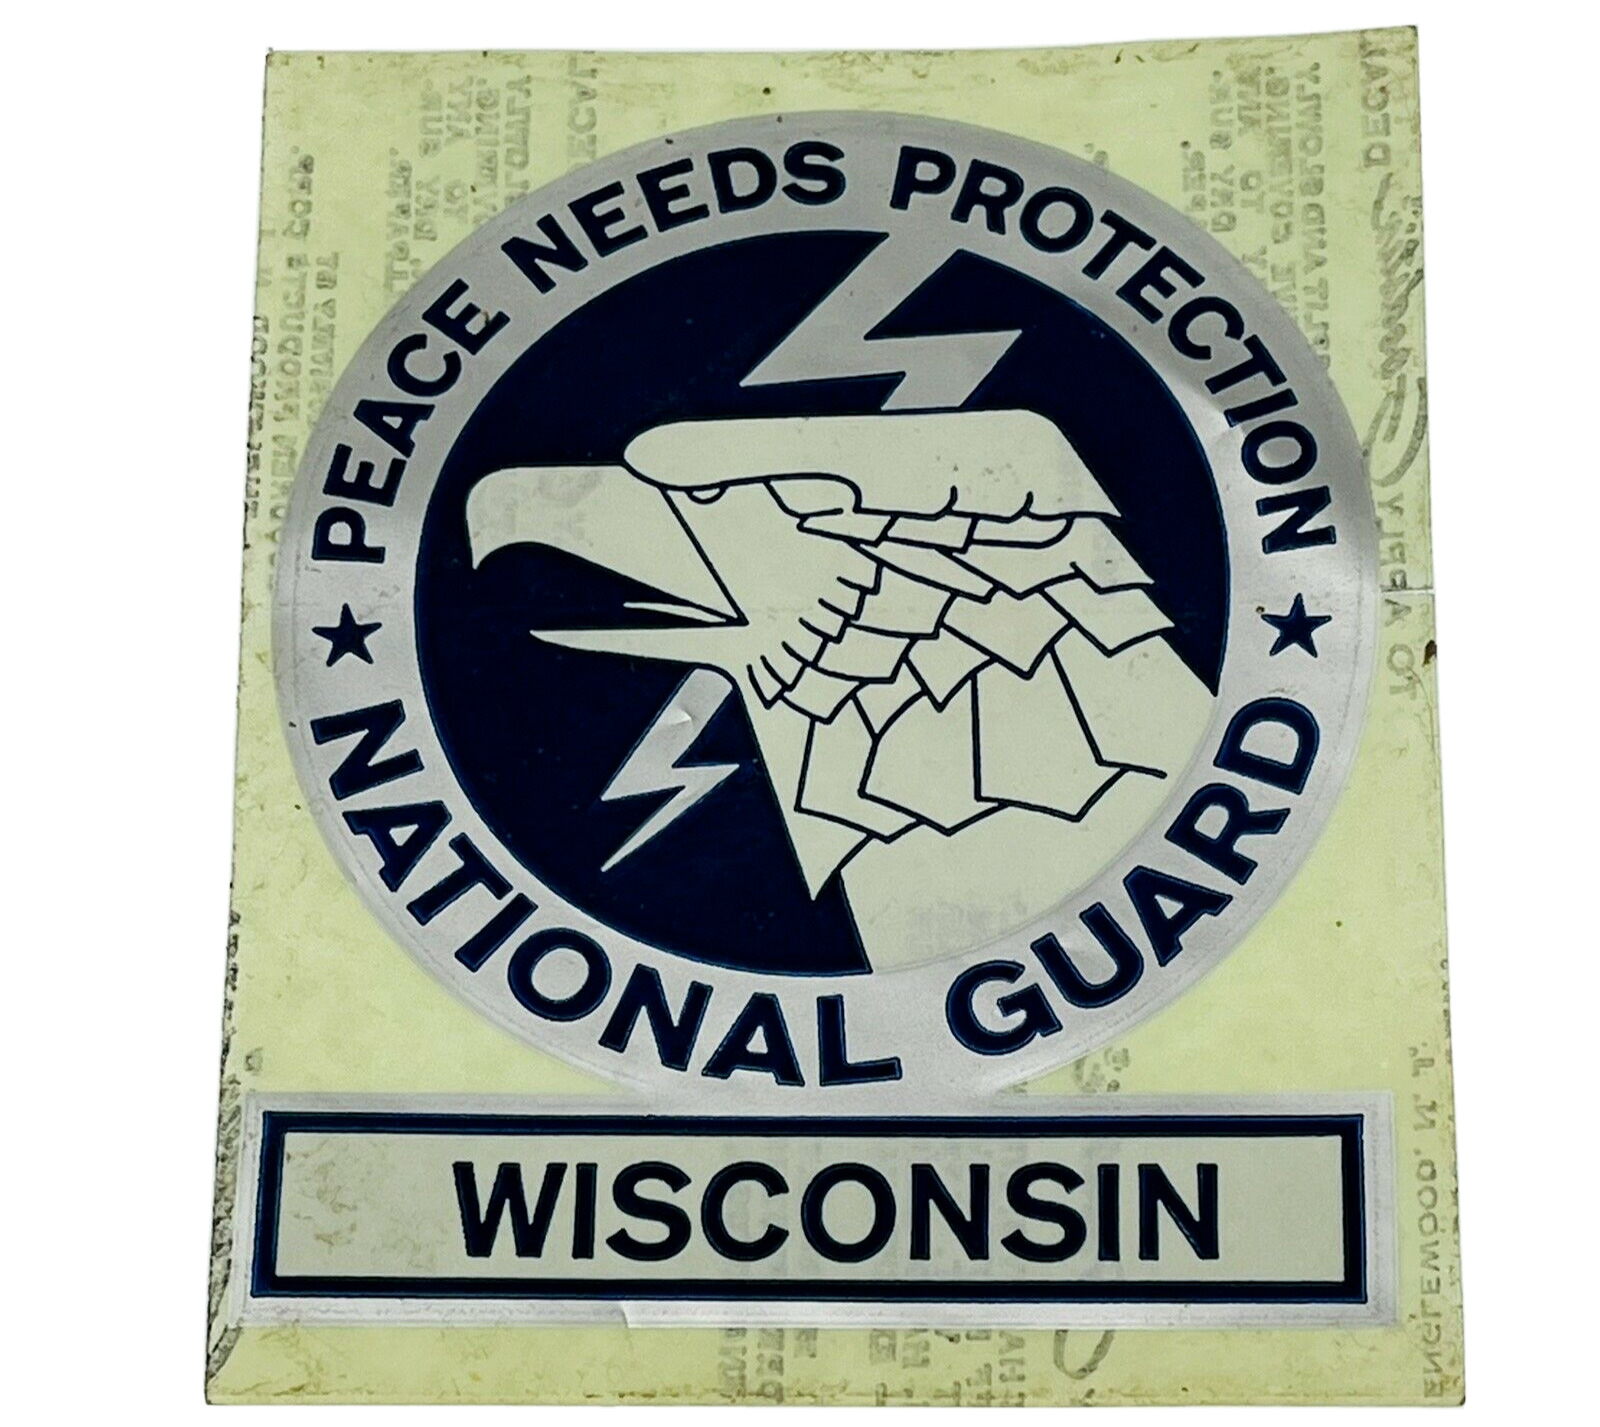 Vintage Wisconsin National Guard Peace Needs Protection Sticker Decal